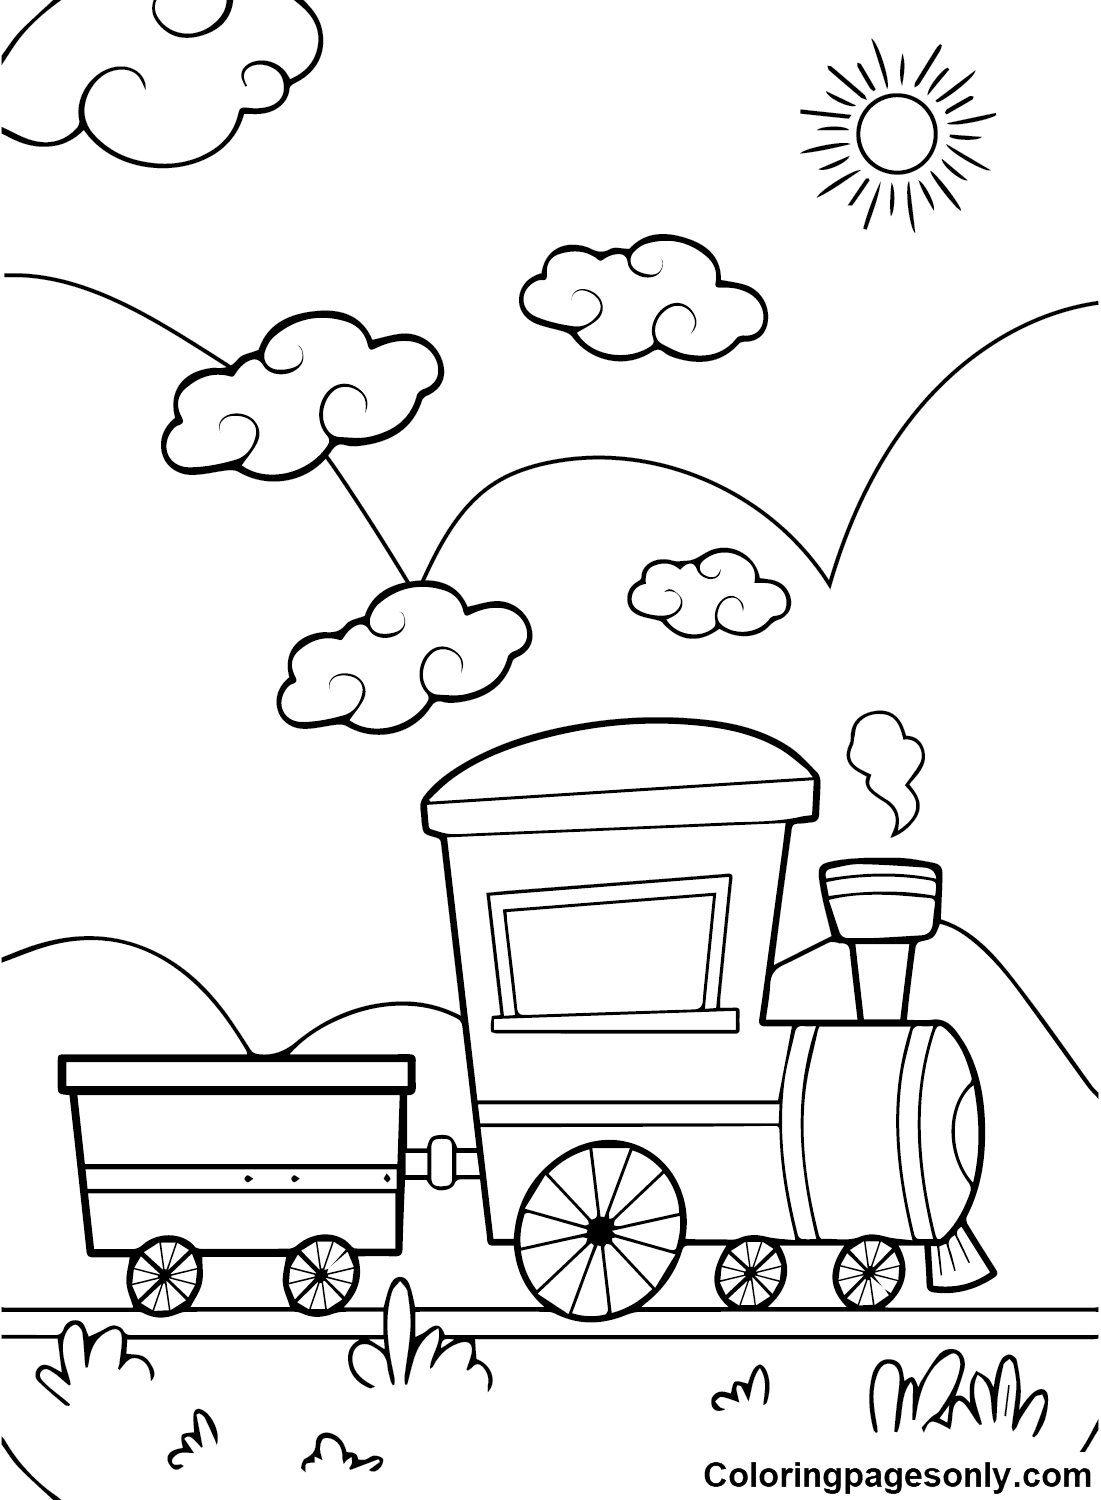 Images Train Coloring Pages